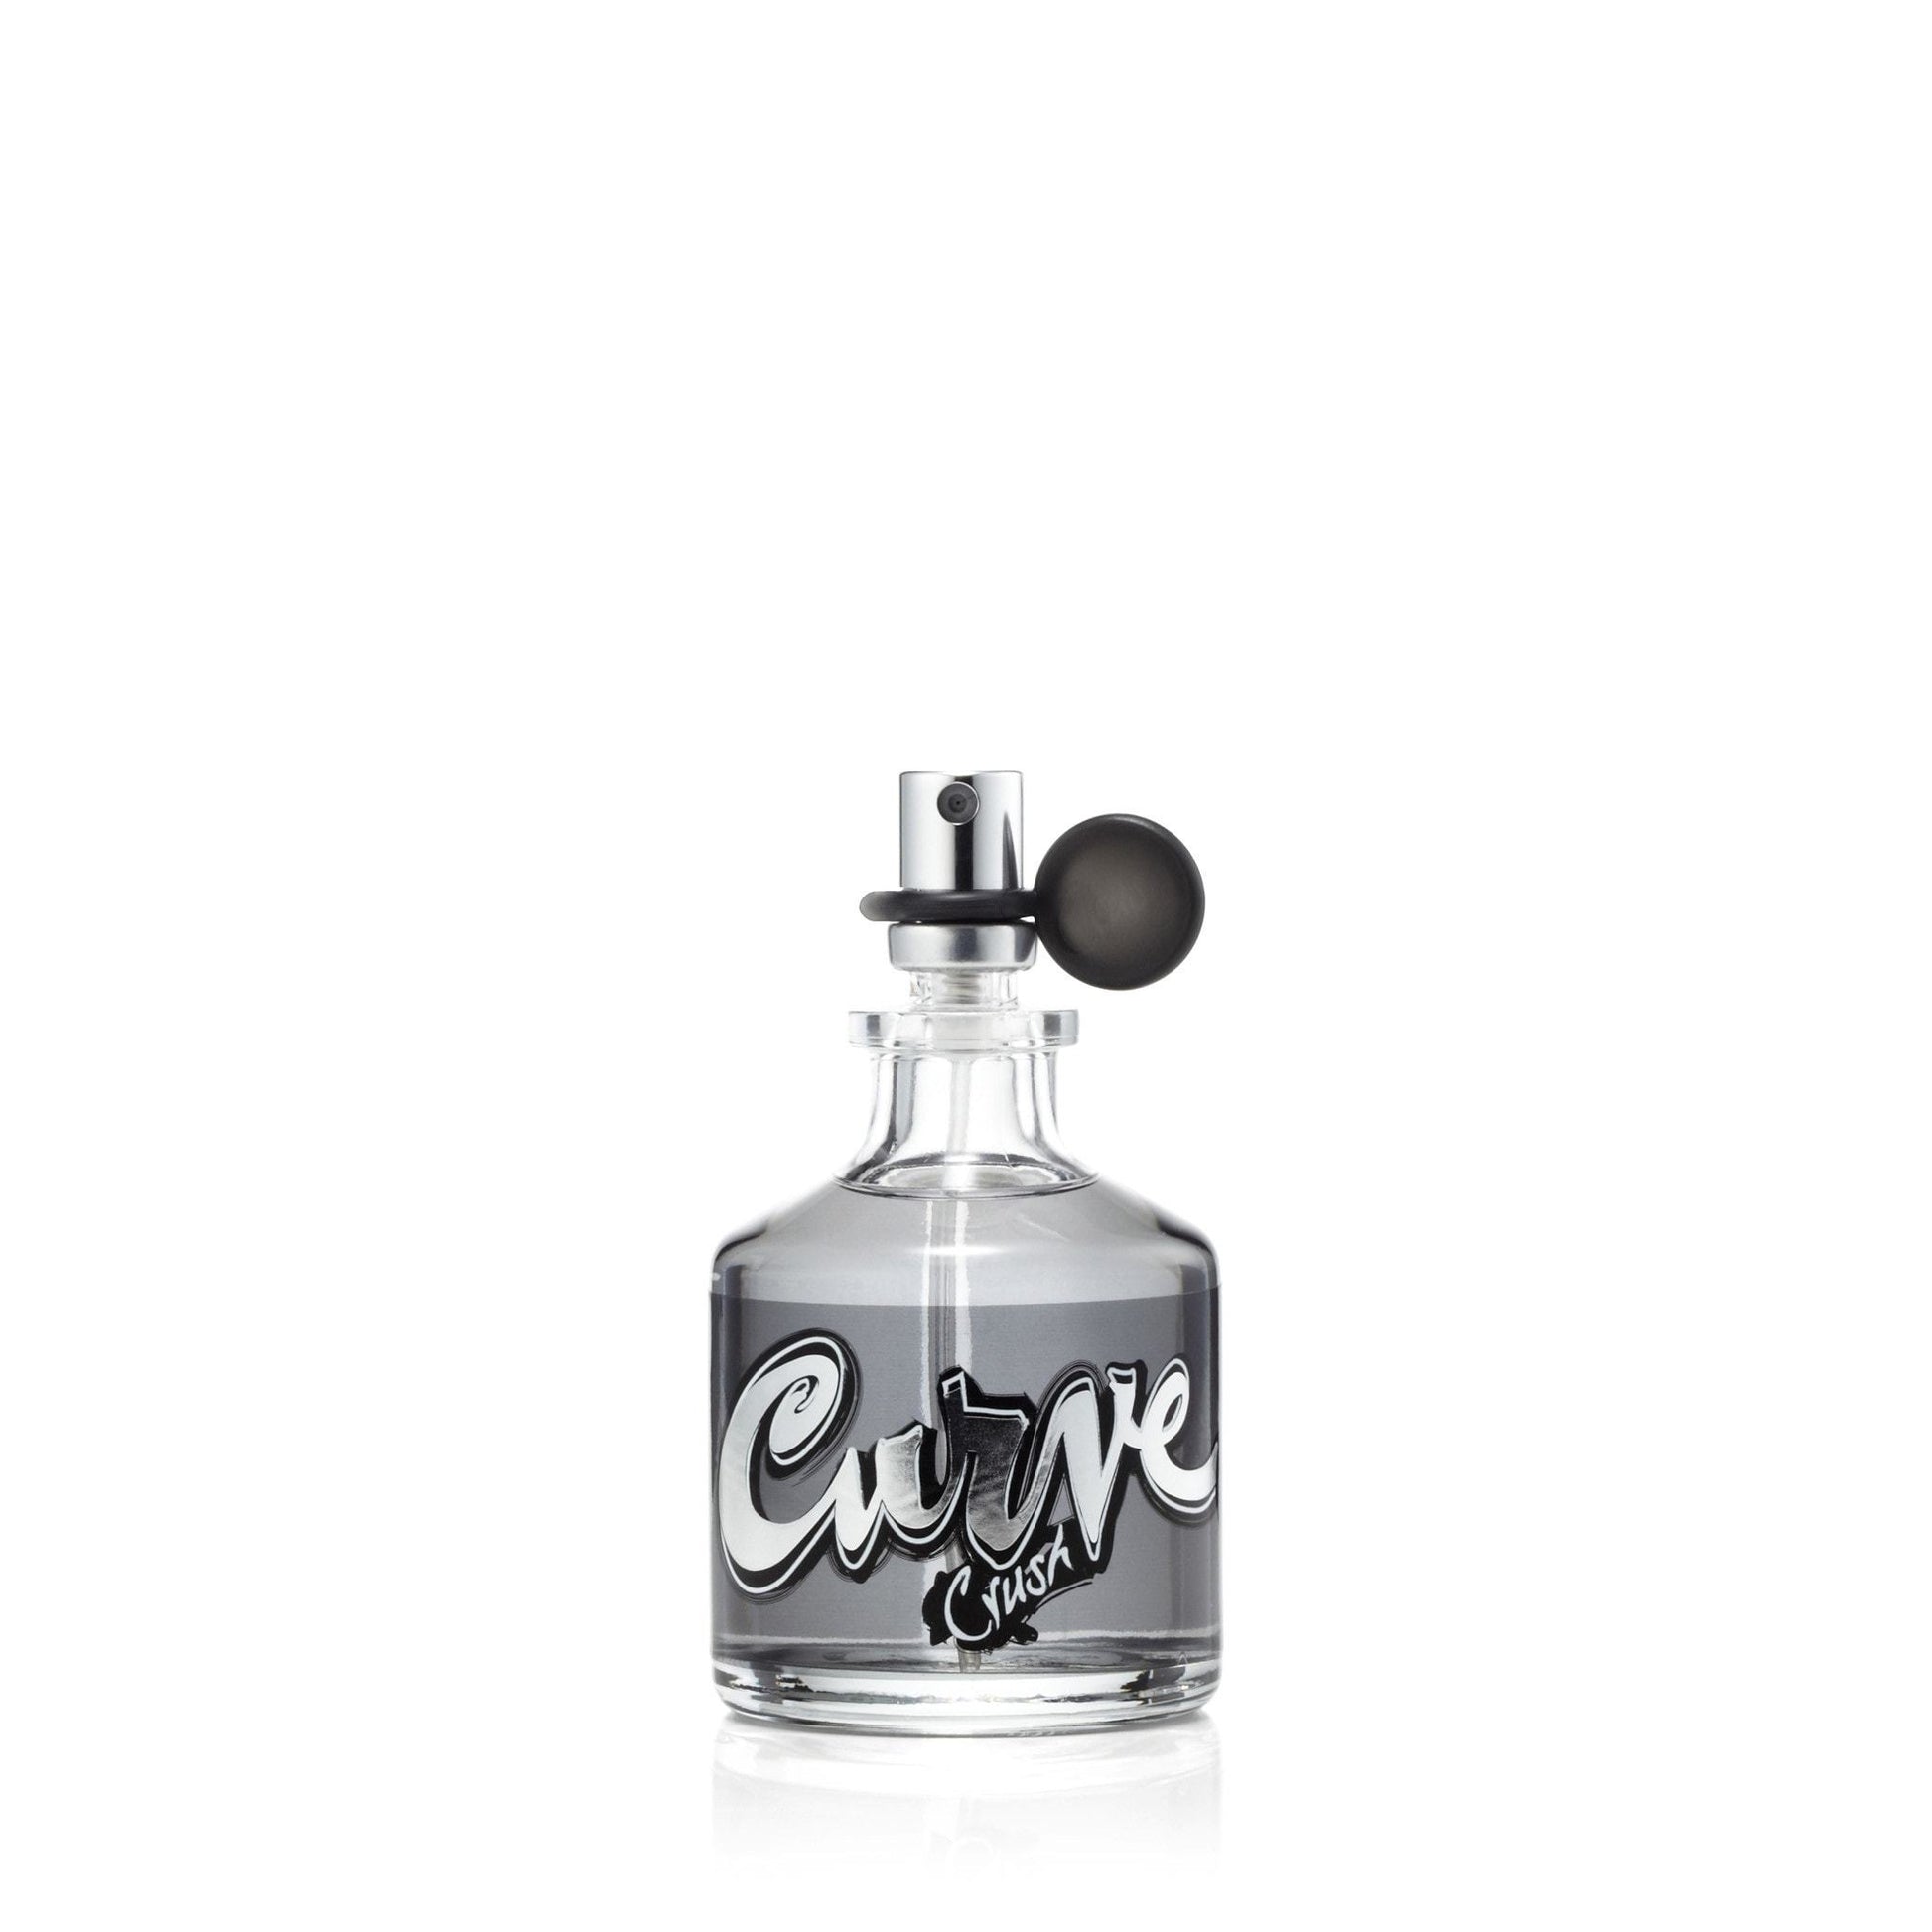 Curve Crush Cologne Spray for Men by Claiborne, Product image 2